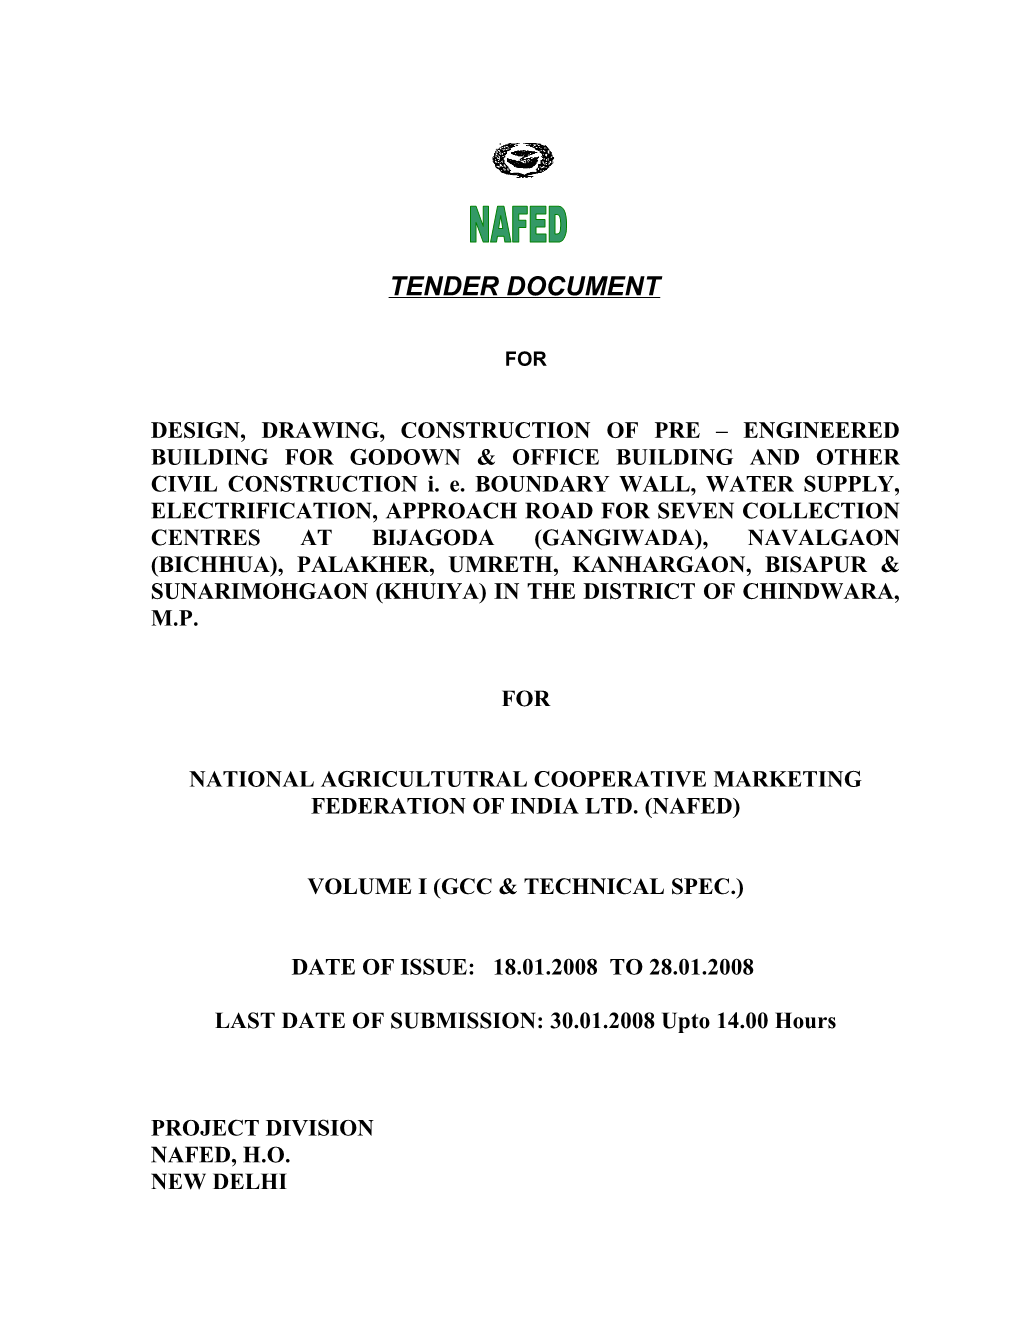 National Agricultutral Cooperative Marketing Federation of India Ltd. (Nafed)